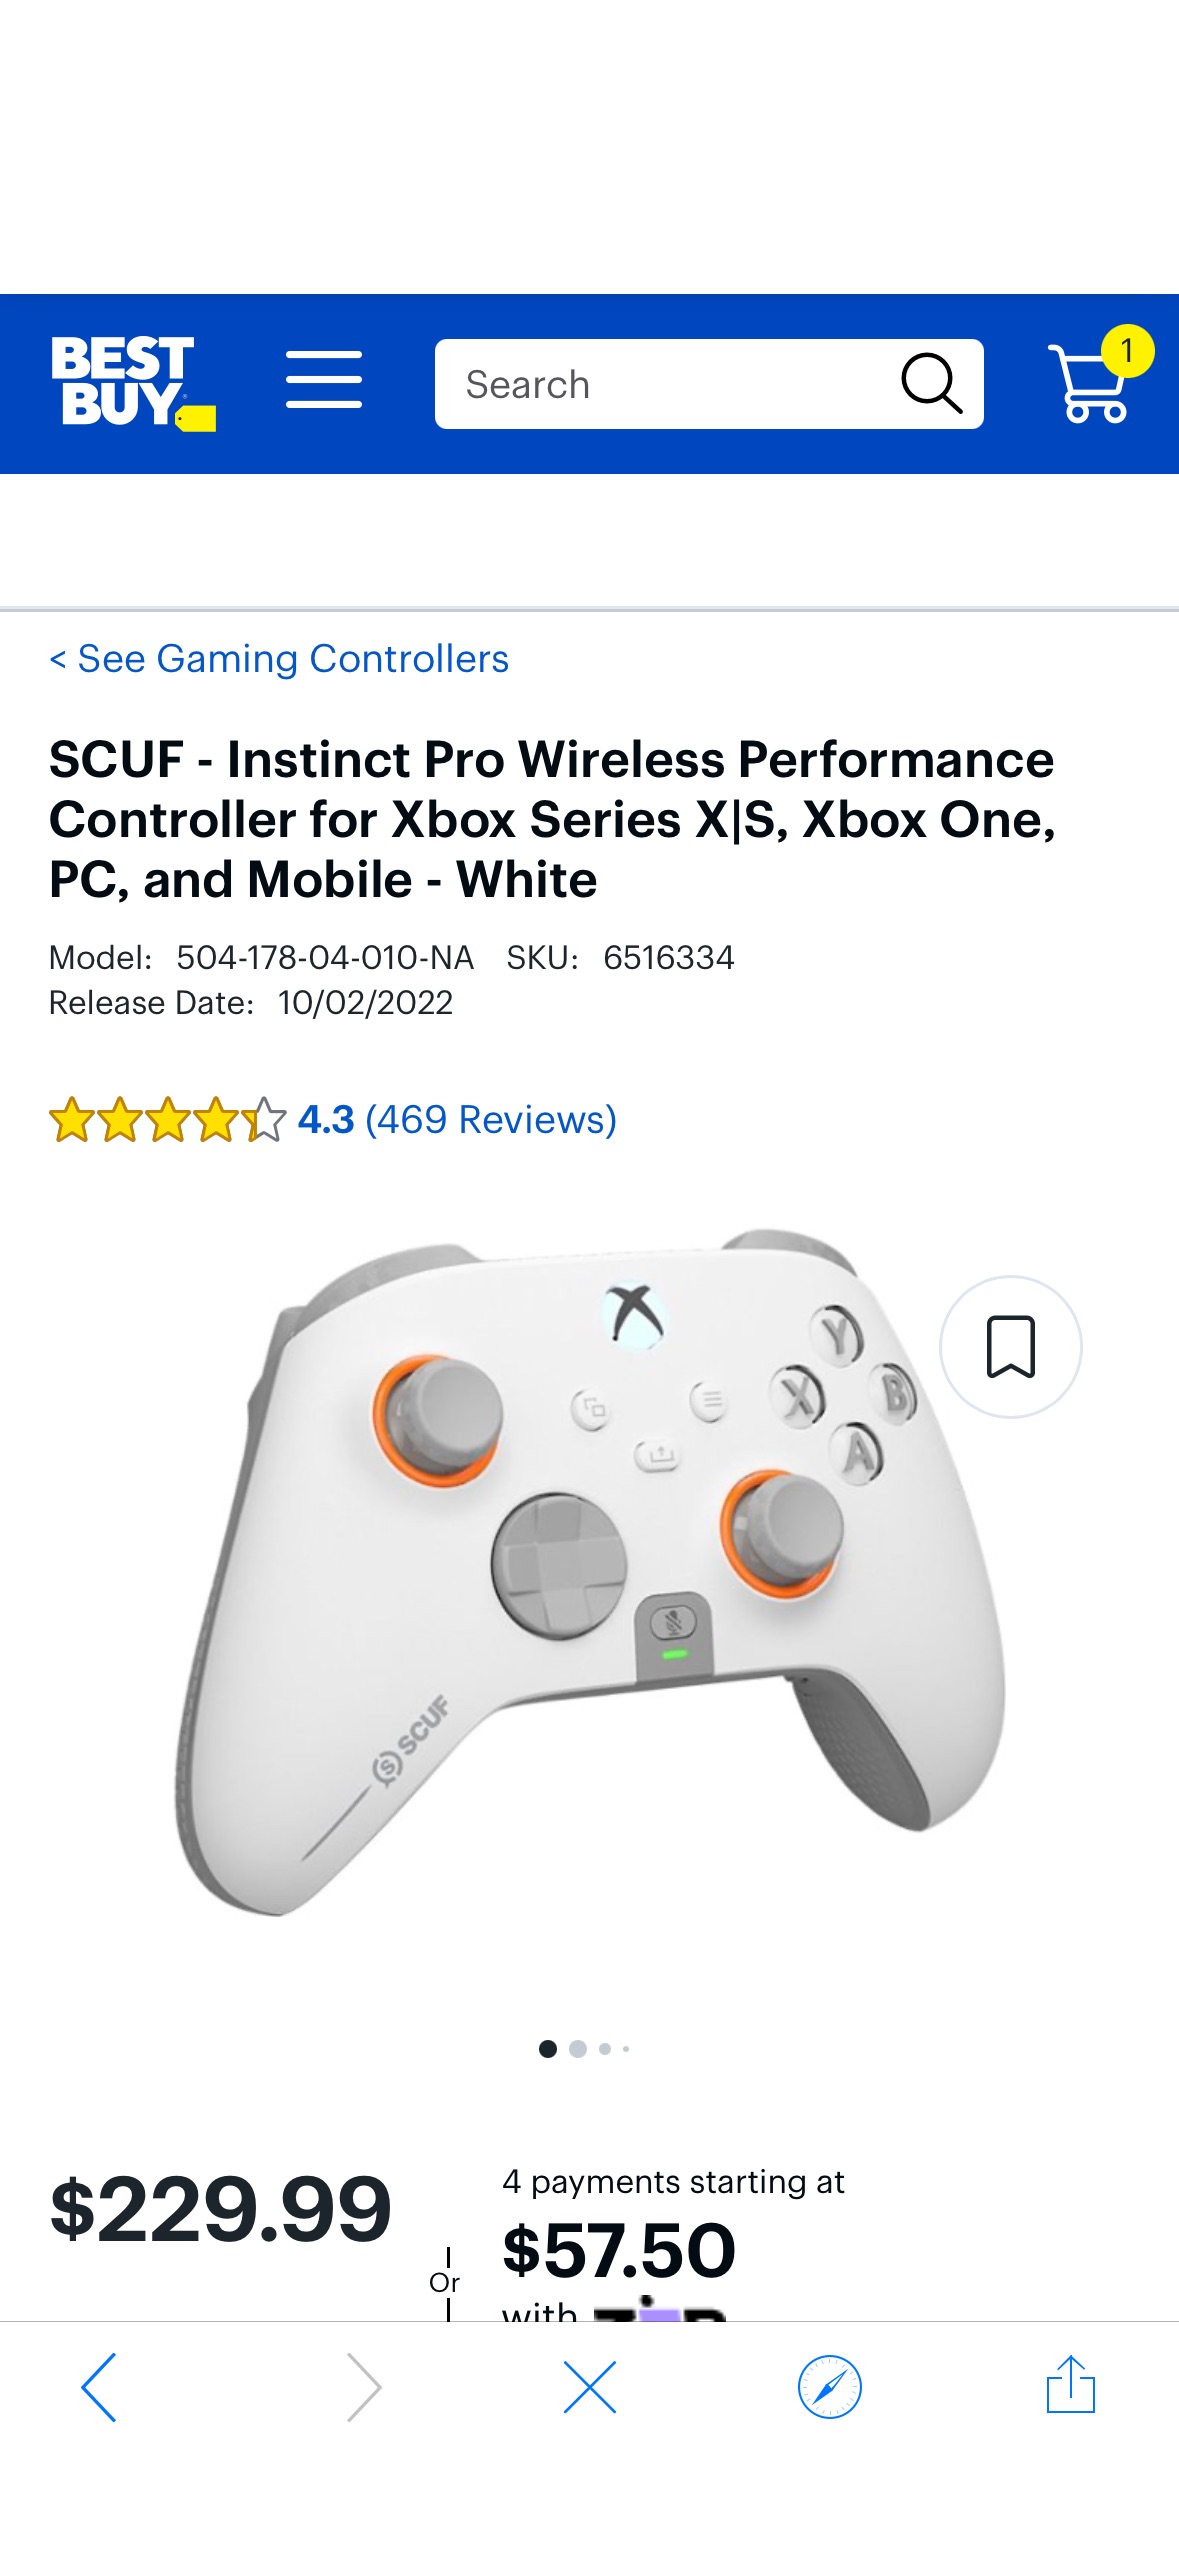 SCUF Instinct Pro Wireless Performance Controller for Xbox Series X|S, Xbox One, PC, and Mobile White 504-178-04-010-NA - Best Buy